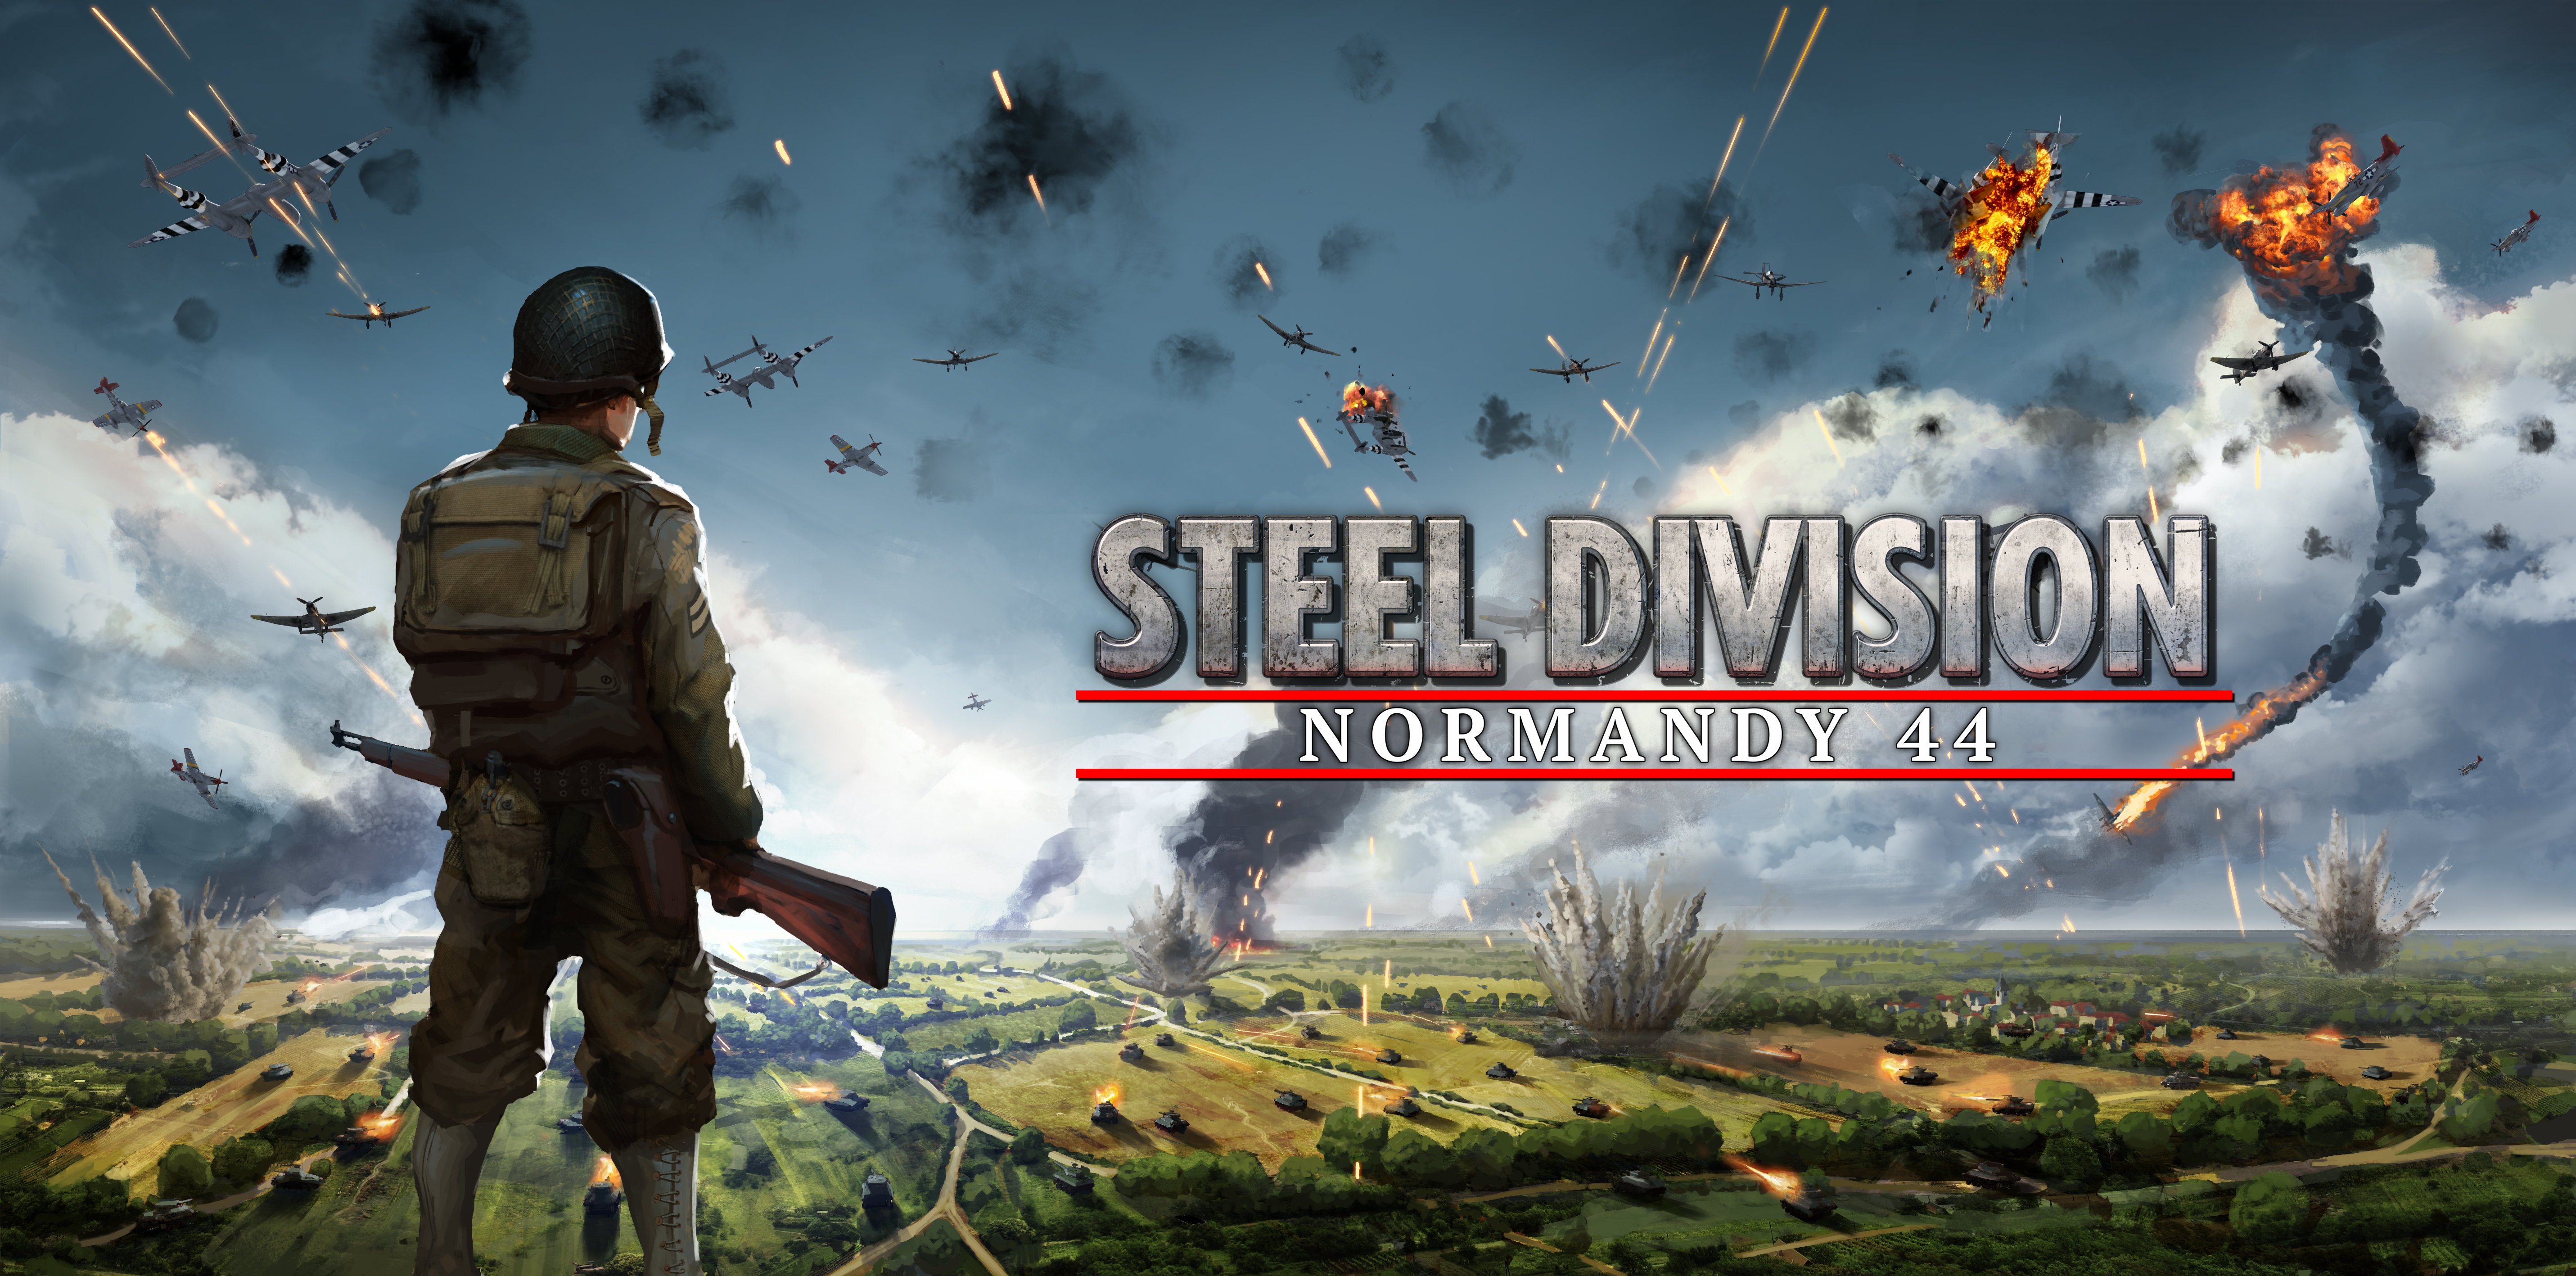 Steel Division Normandy